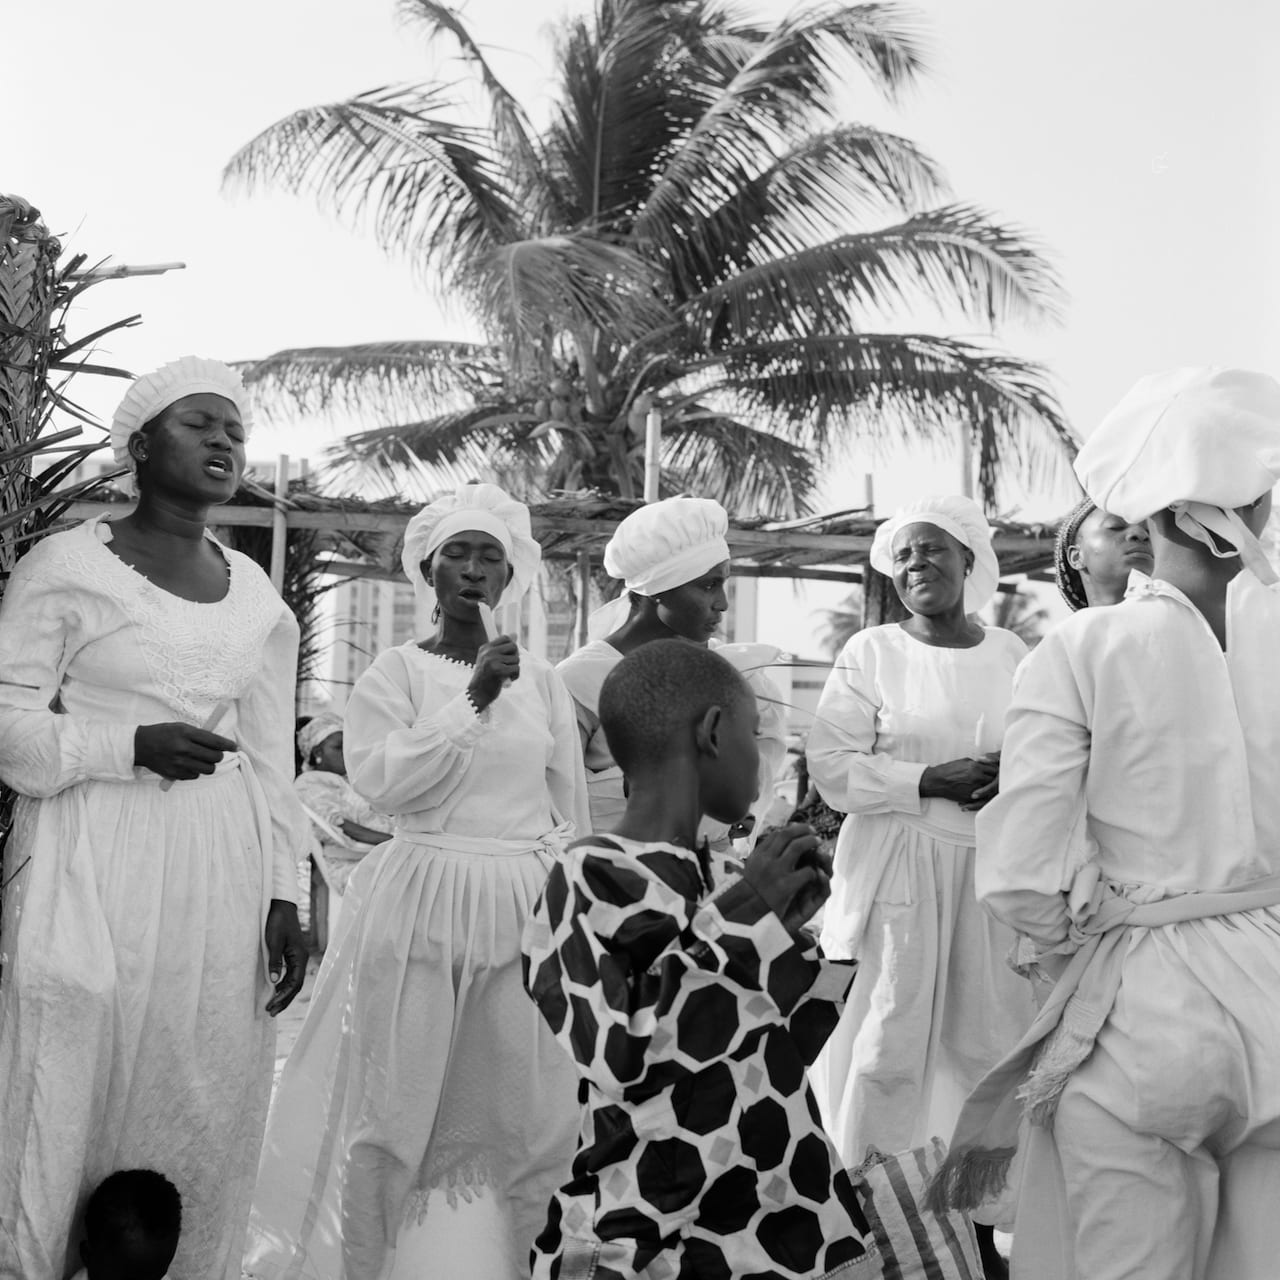 Akinbode Akinbiyi: Six Songs, Swirling Gracefully in the Taut Air – British Journal of Photography